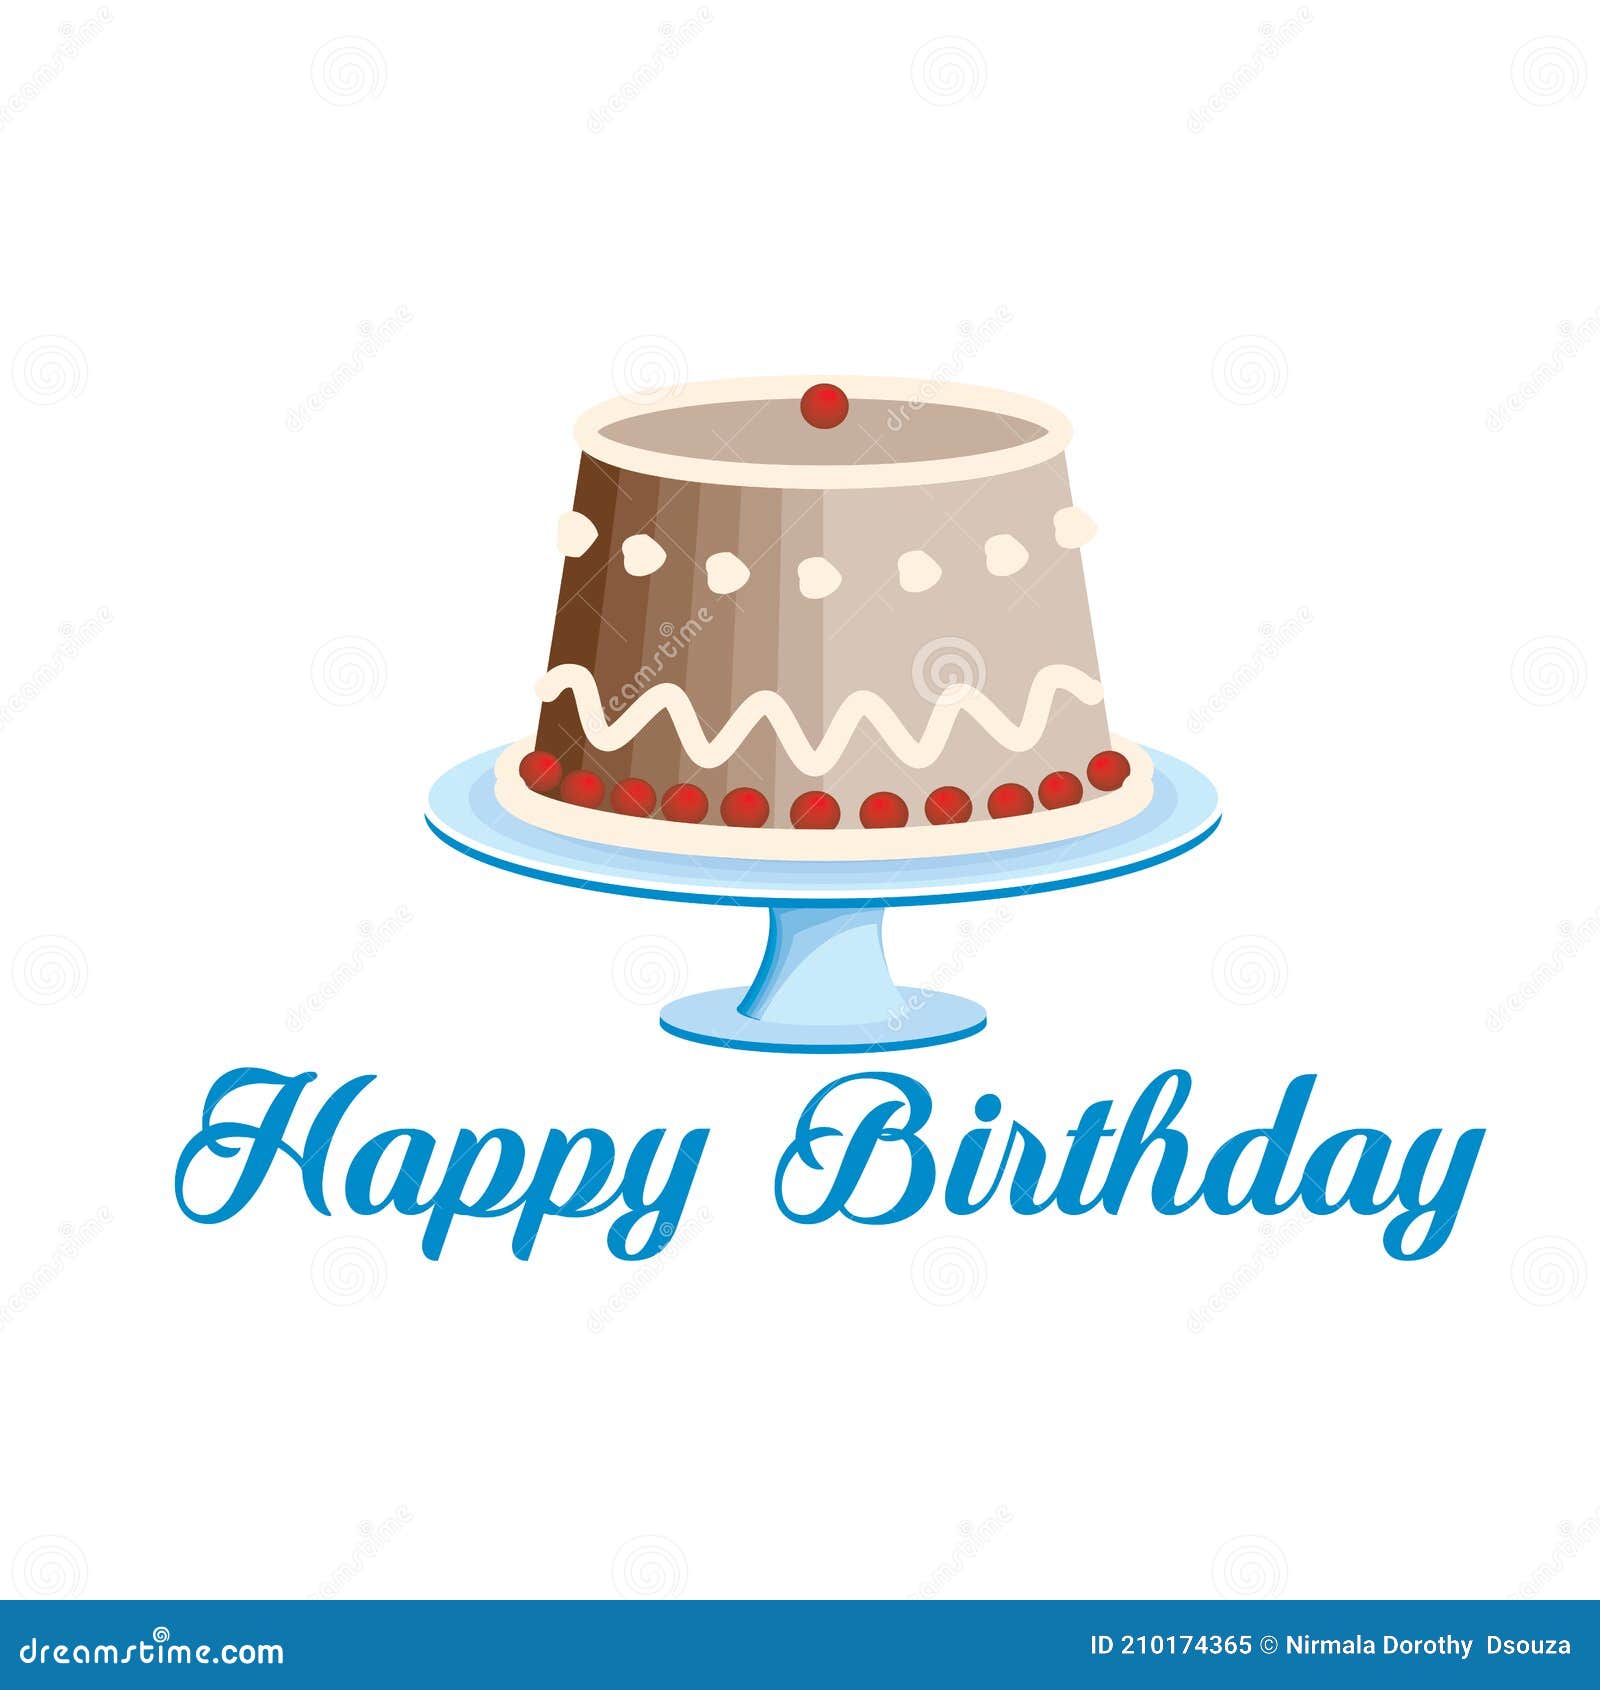 Happy Birthday Greeting Card with Typography Design Stock Vector ...